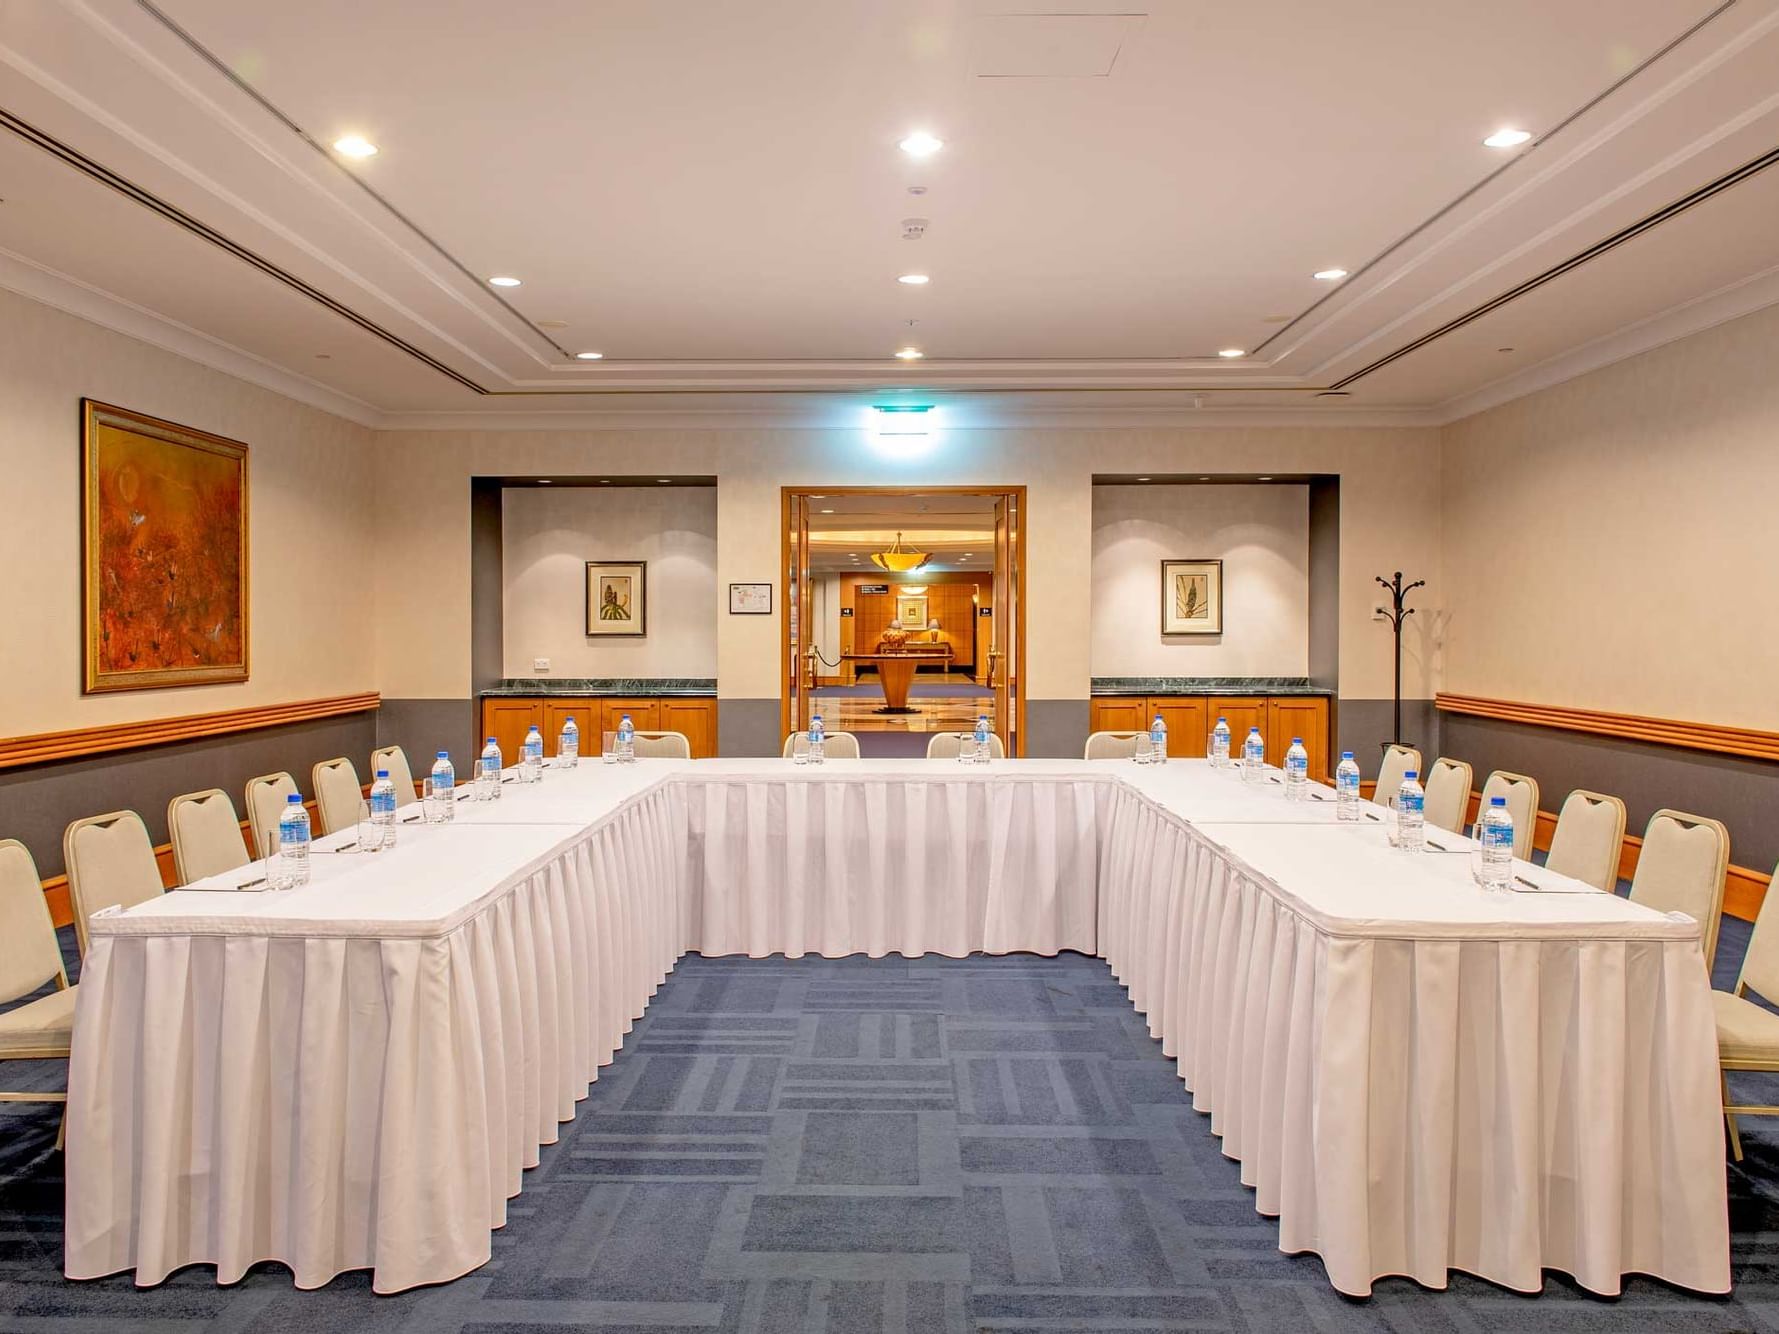 A view of the Meeting Room arranged in U-shape in Duxton Hotel